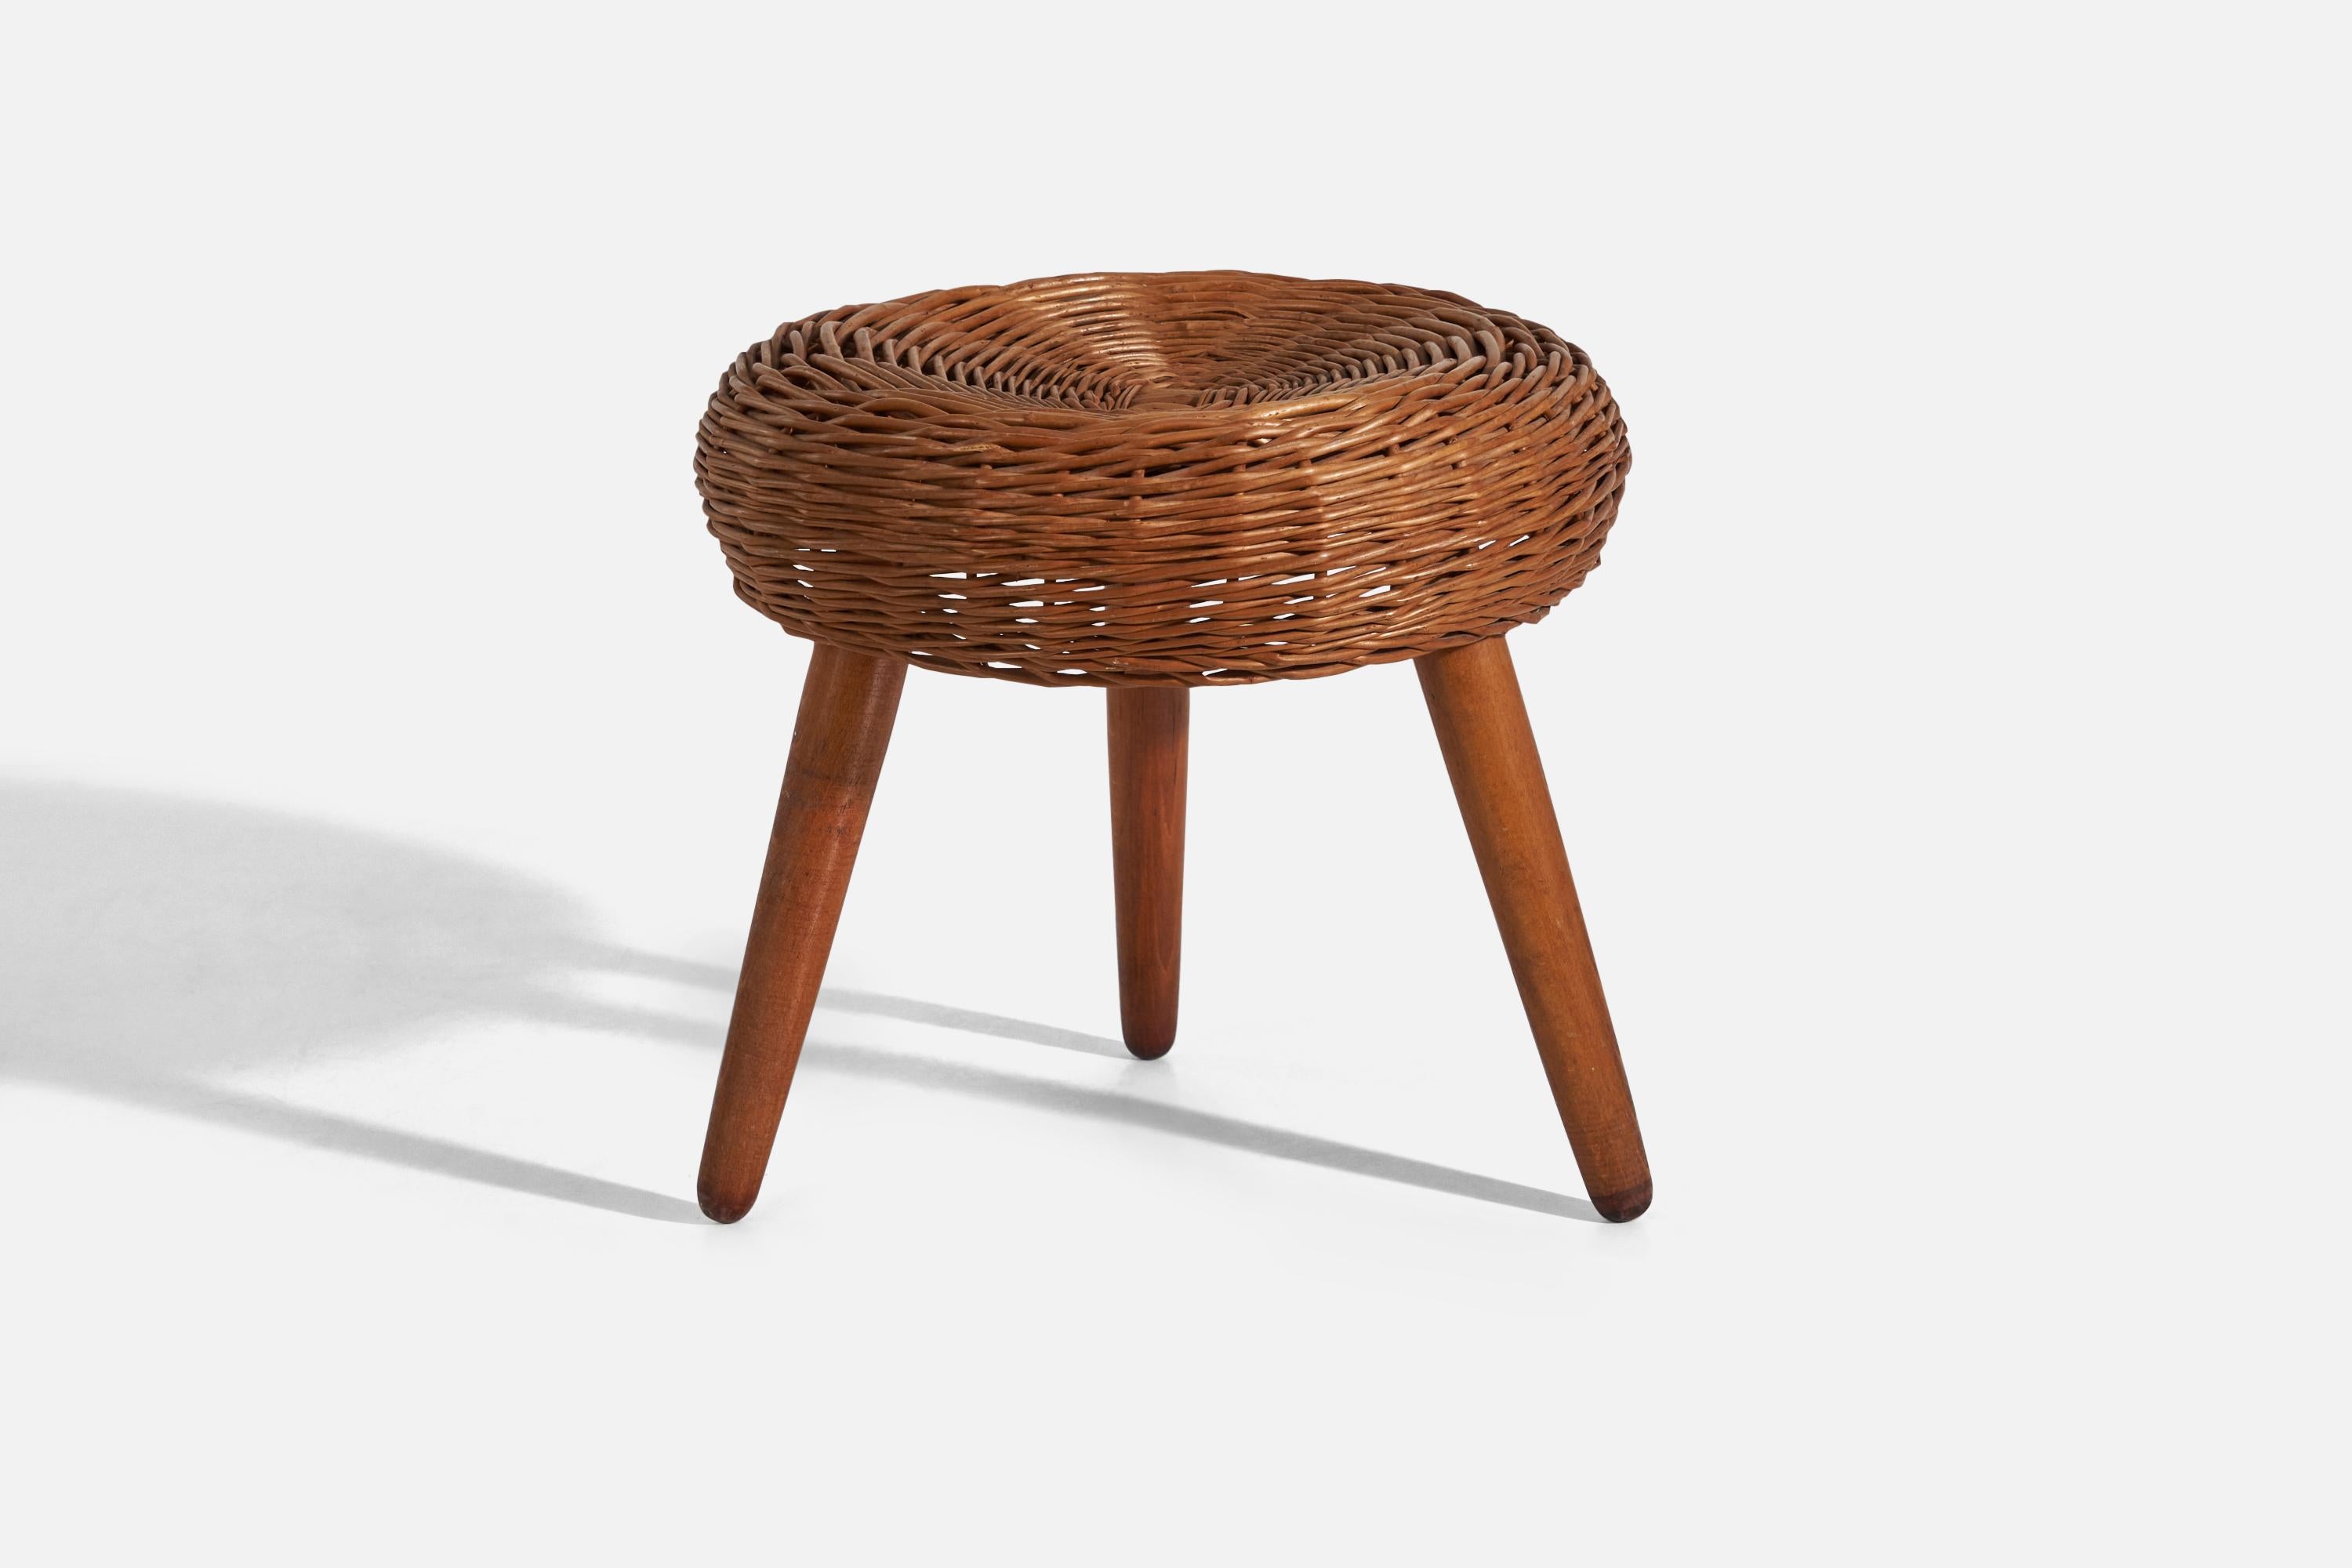 A wicker and wooden stool; design and production attributed to Tony Paul, United States, 1950s.
 